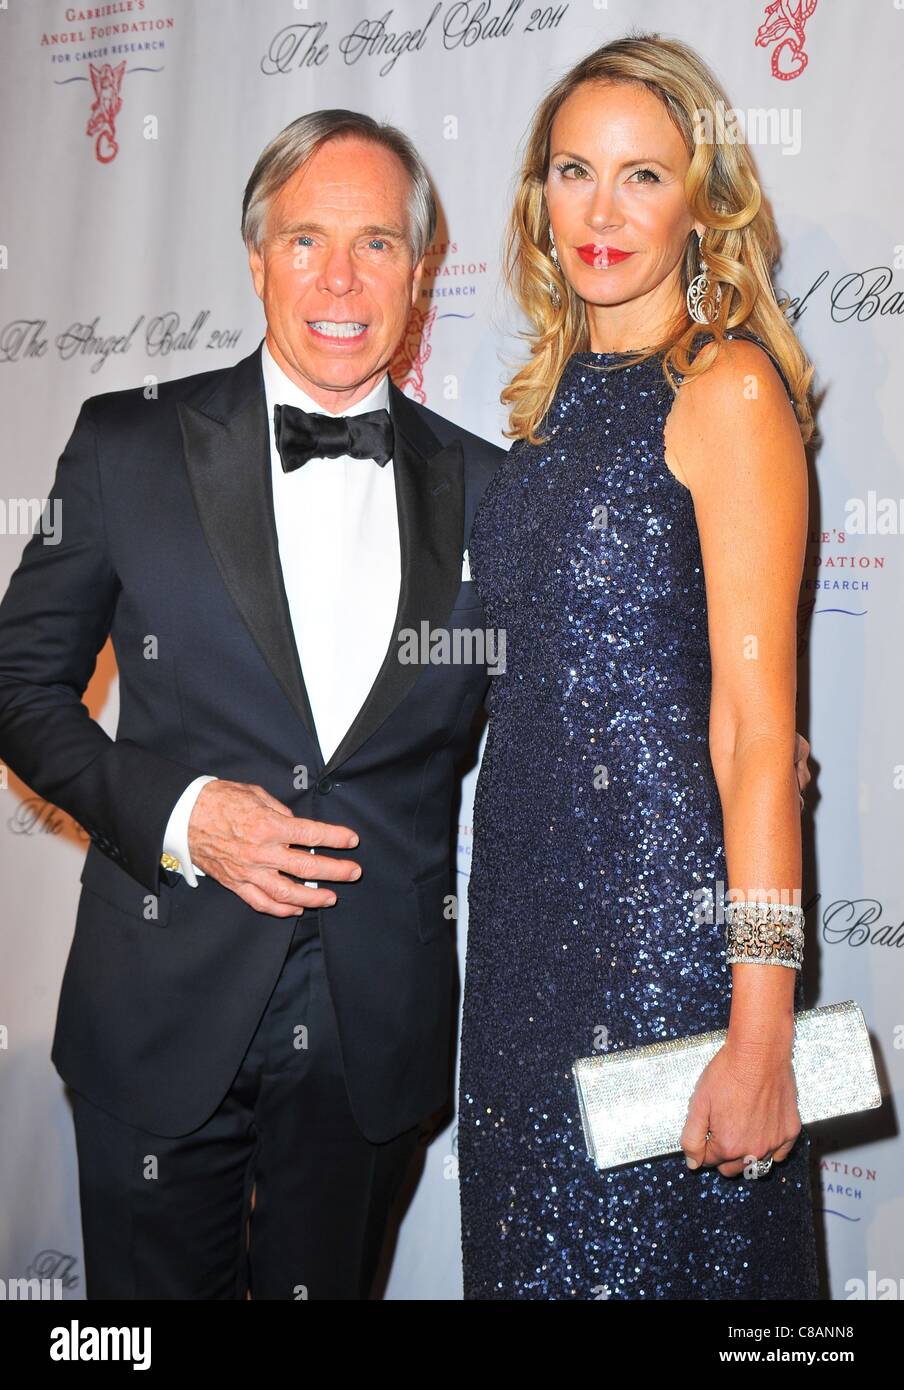 Tommy Hilfiger, Dee Ocleppo at arrivals for The Angel Ball Benefit for  Gabrielle's Angel Foundation for Cancer Research, Cipriani Restaurant Wall  Street, New York, NY October 17, 2011 Stock Photo - Alamy